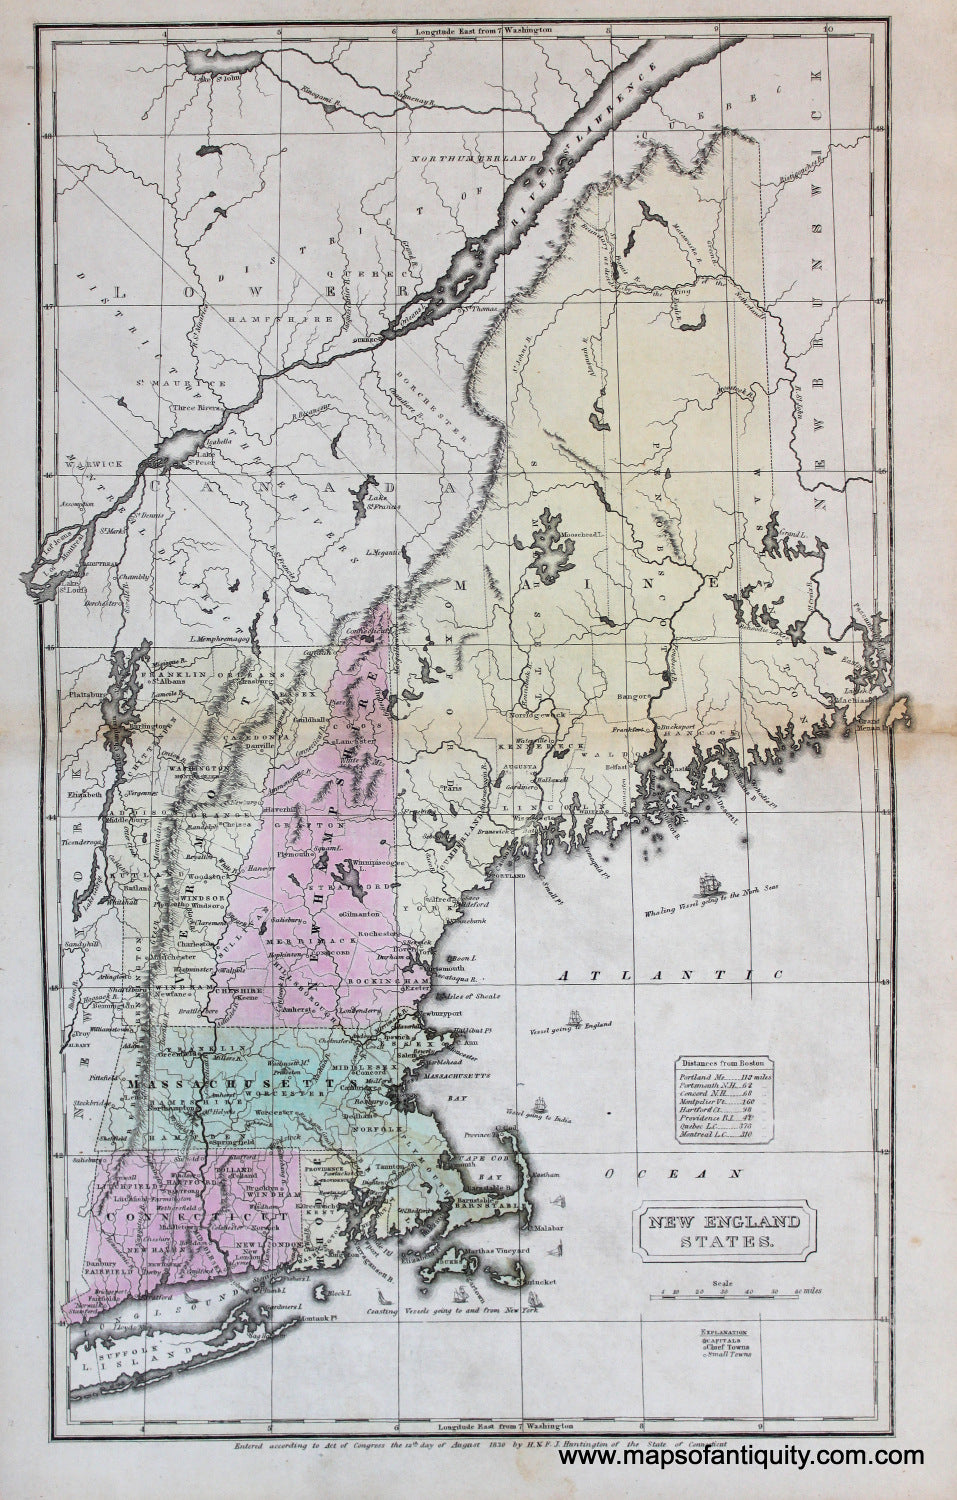 Antique-Hand-Colored-Map-New-England-States-**********-United-States-New-England-1830/1833-Malte-Brun-Maps-Of-Antiquity